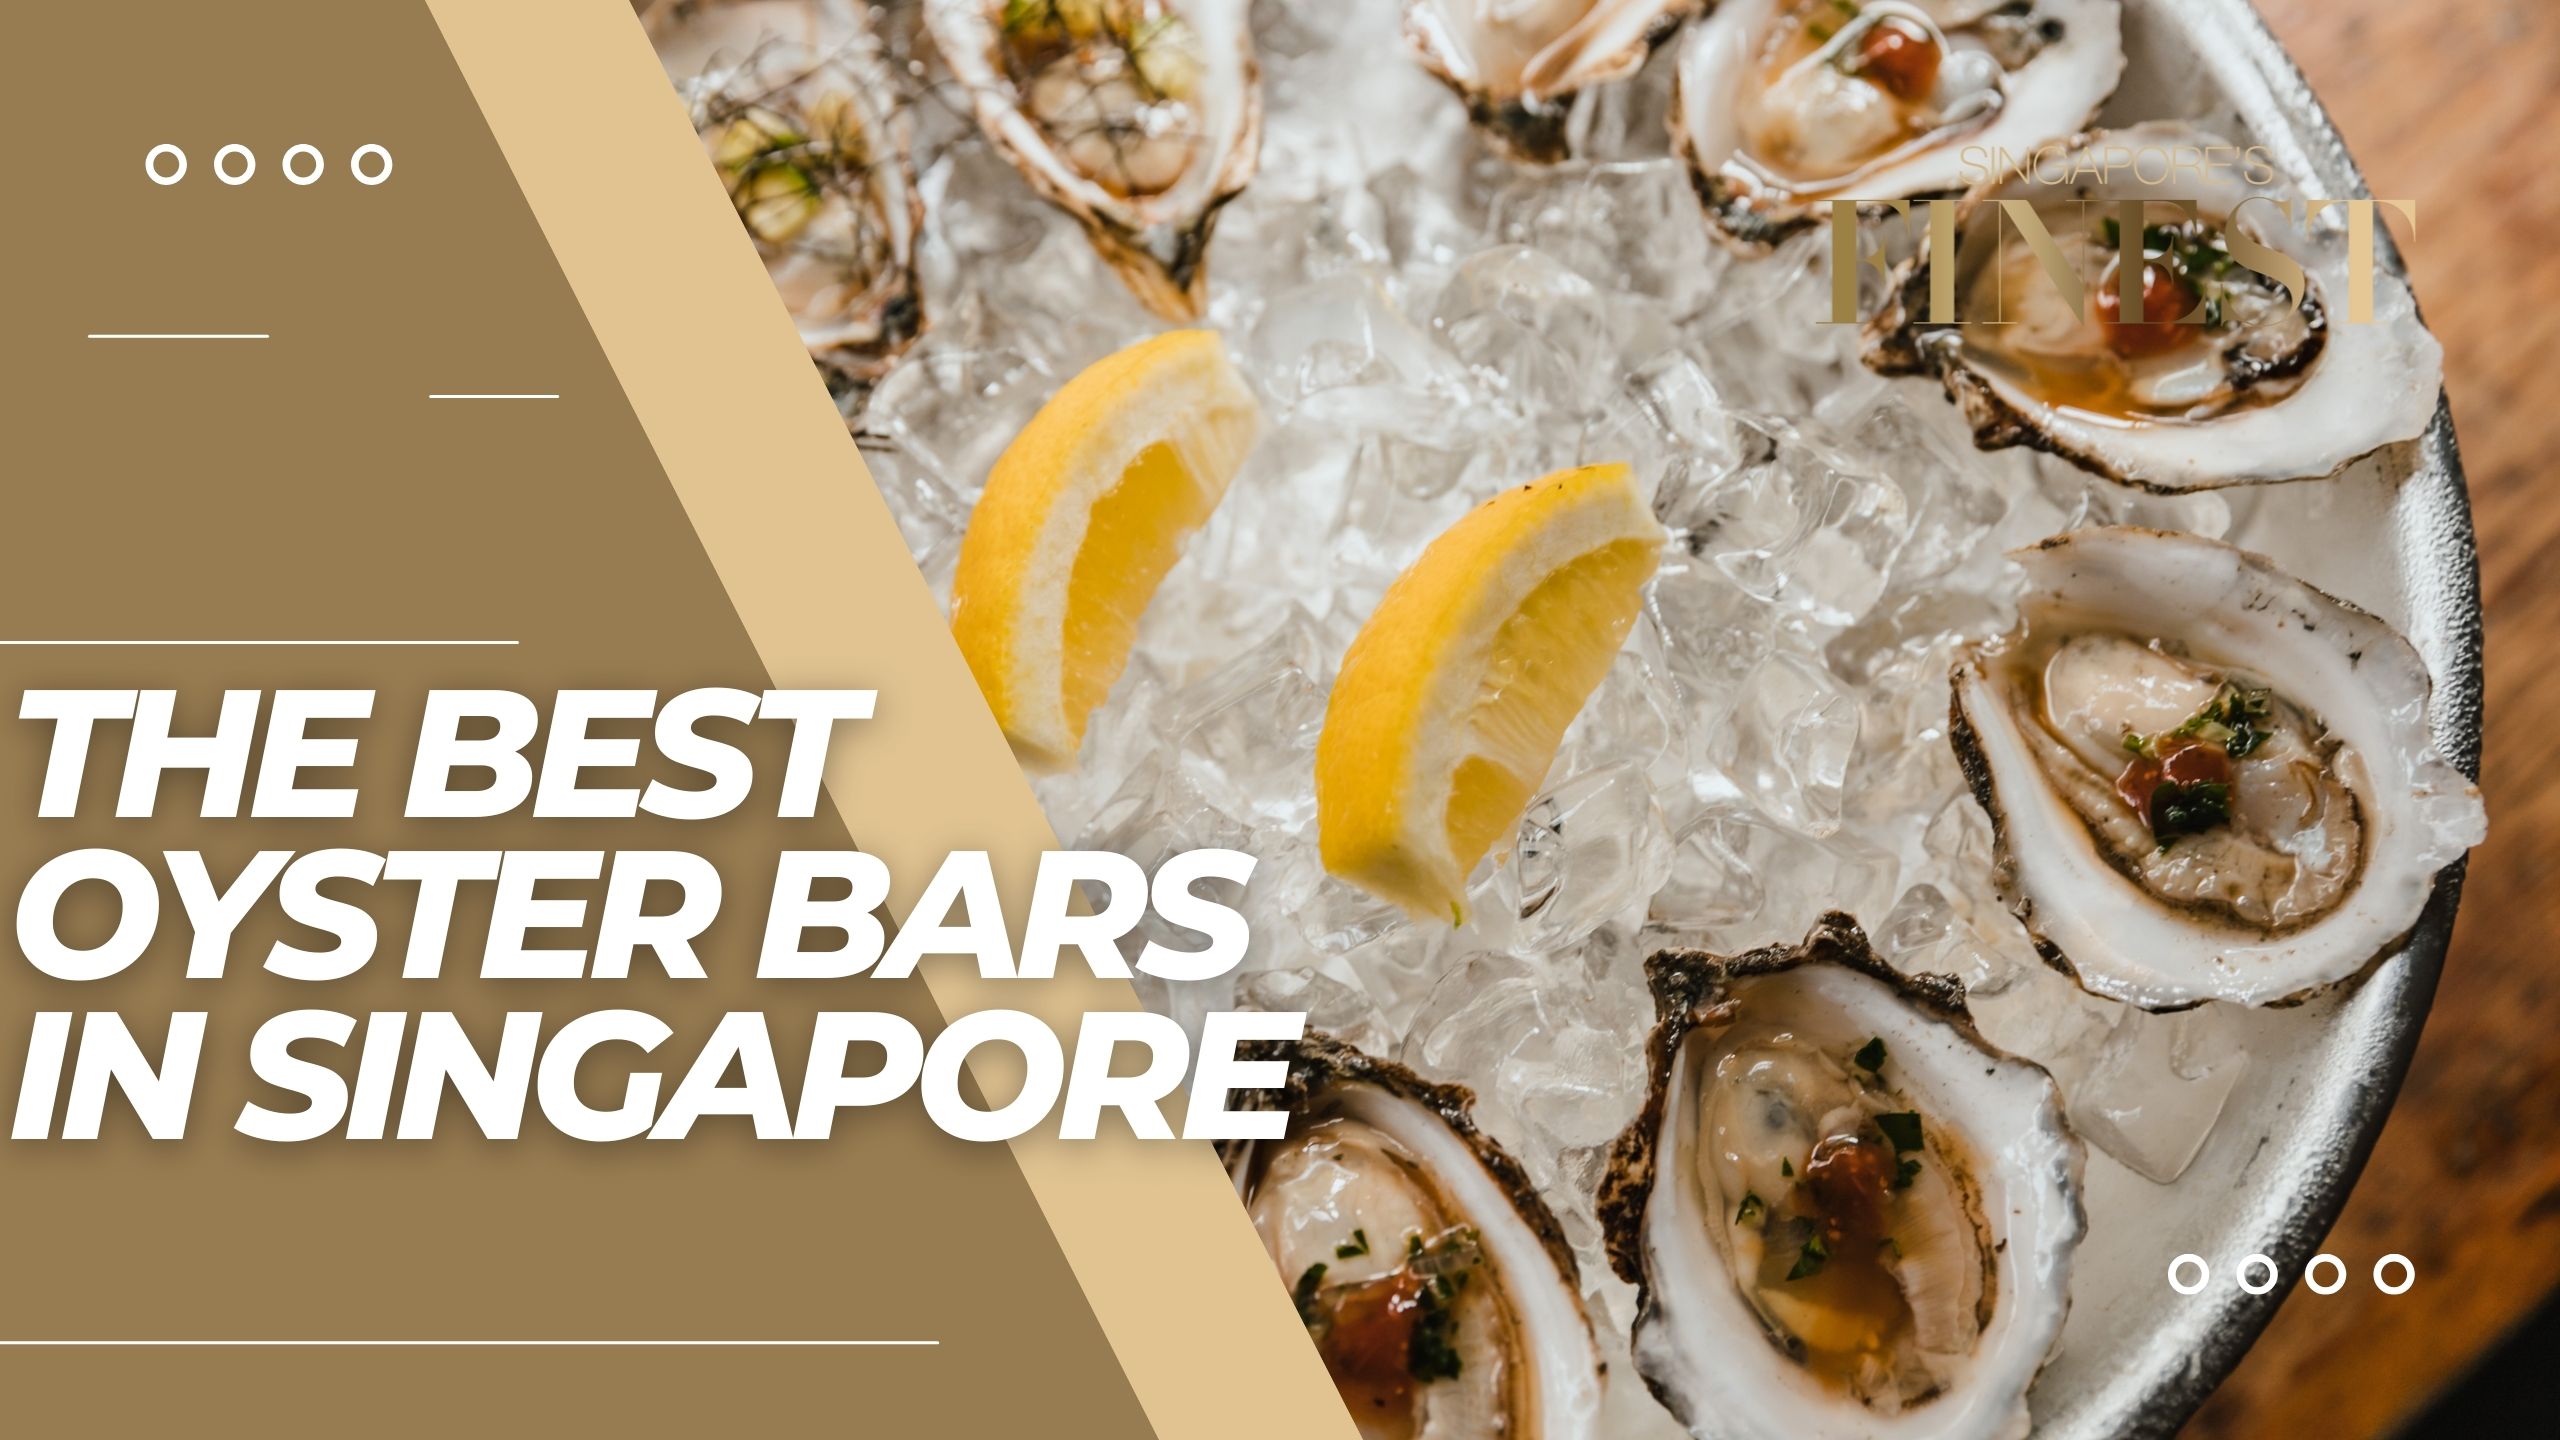 The Finest Oyster Bars in Singapore